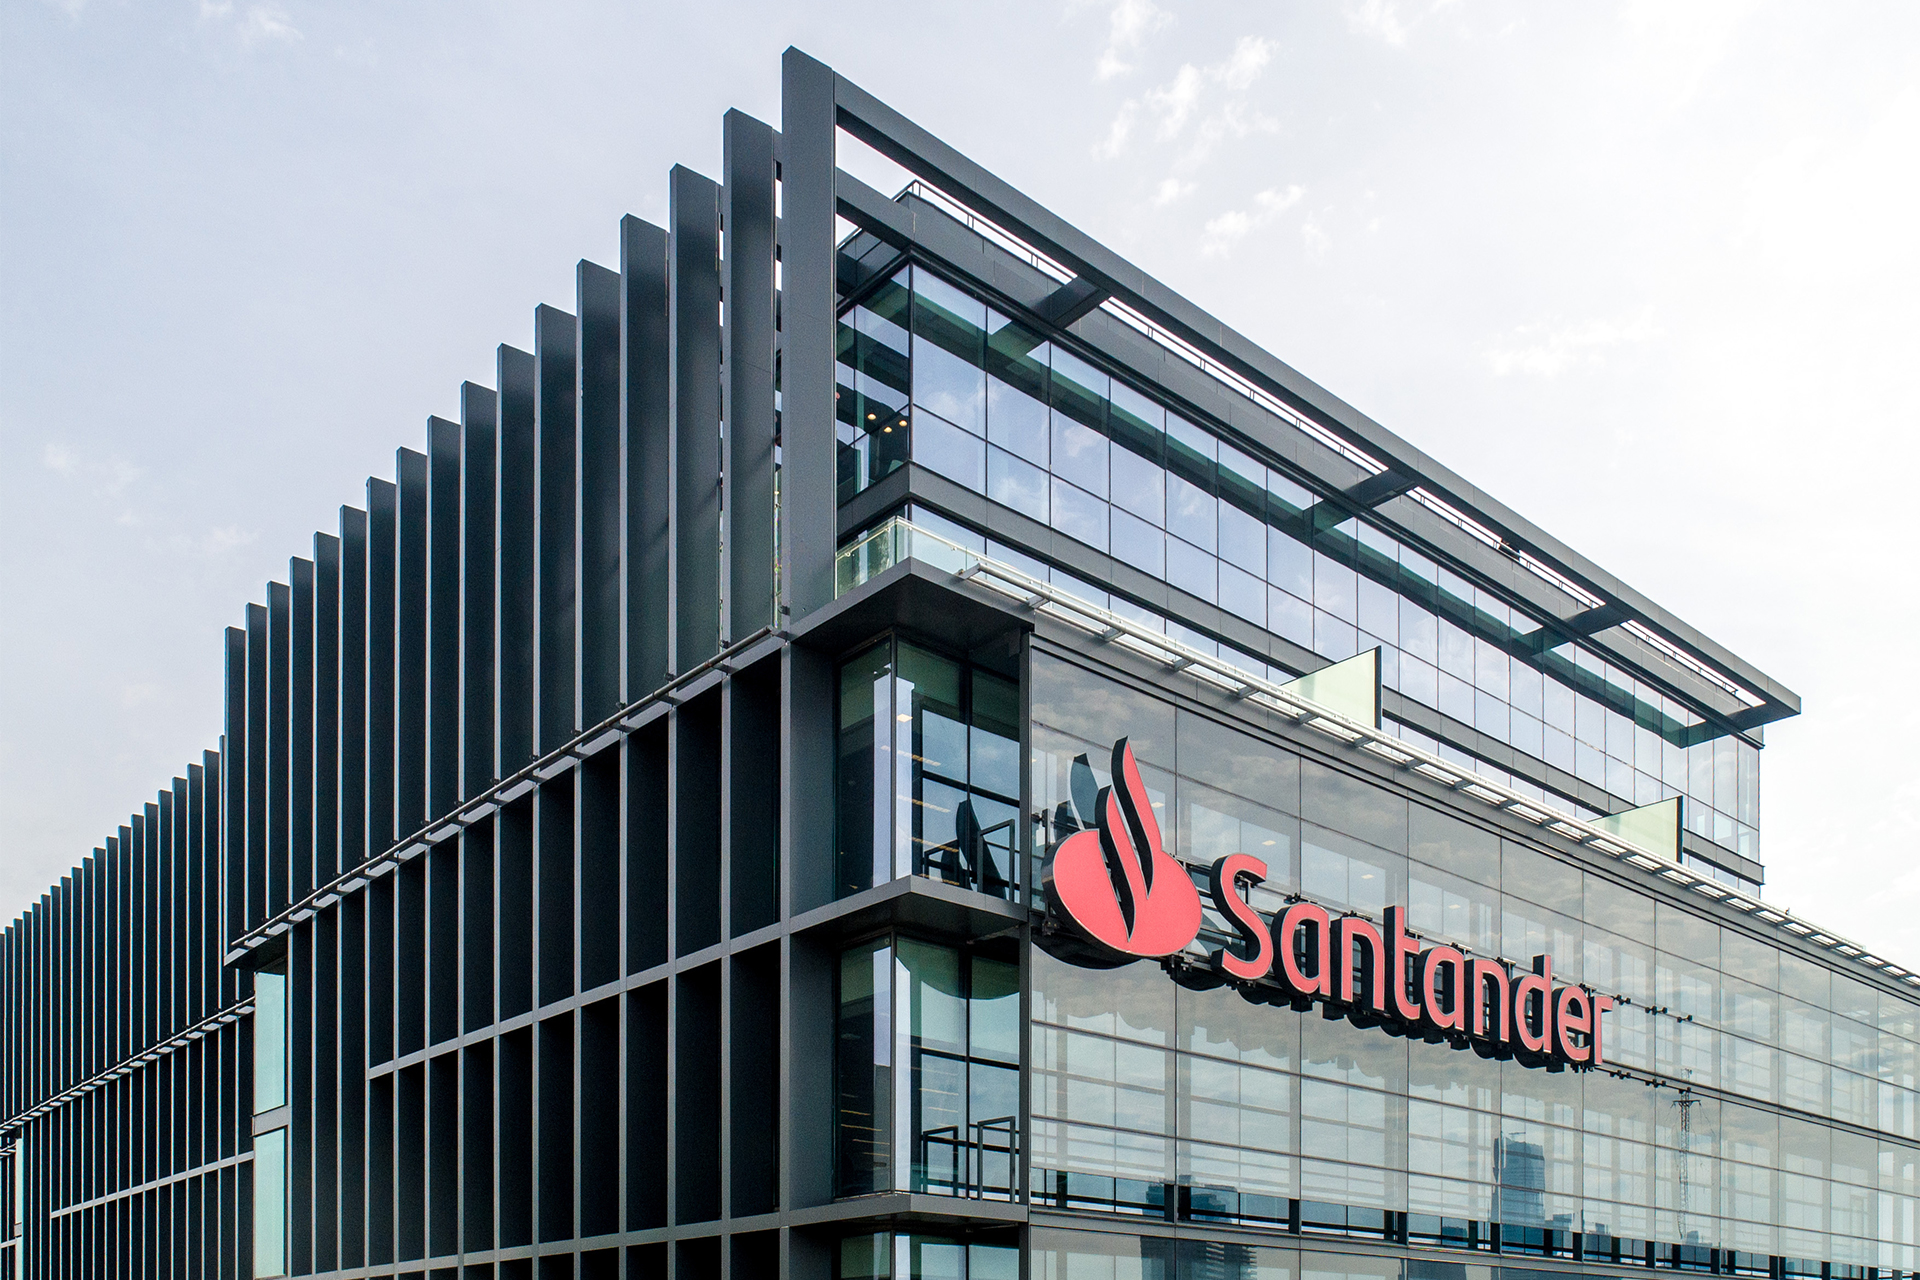 To support the fight against coronavirus Santander board to review 2020  dividend and cut senior management and board compensation